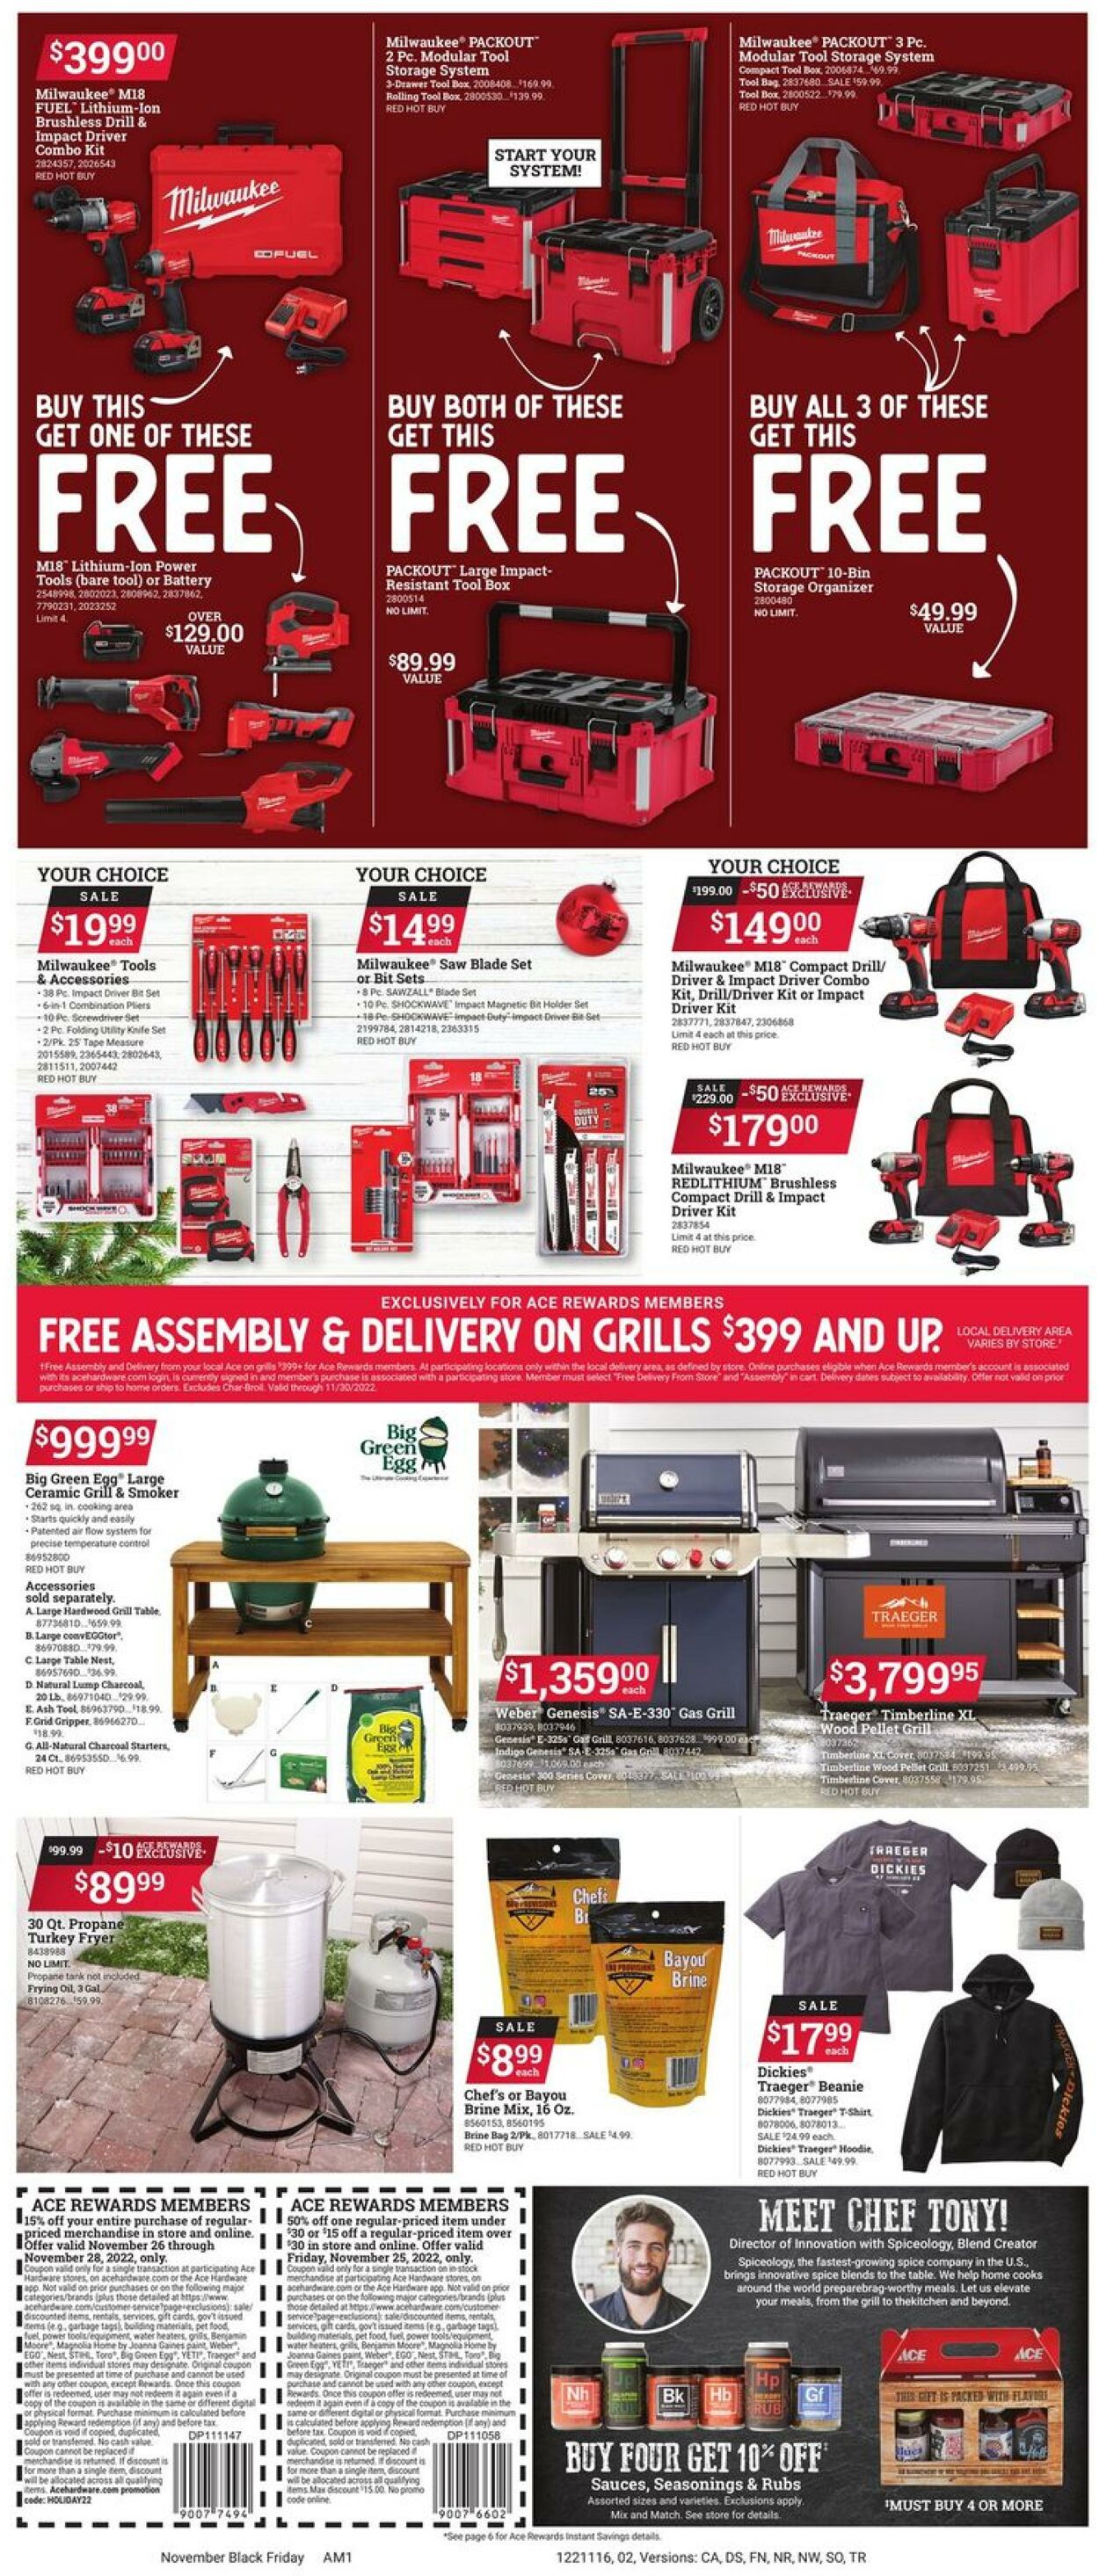 Weekly ad Ace Hardware 11/16/2022 - 11/30/2022